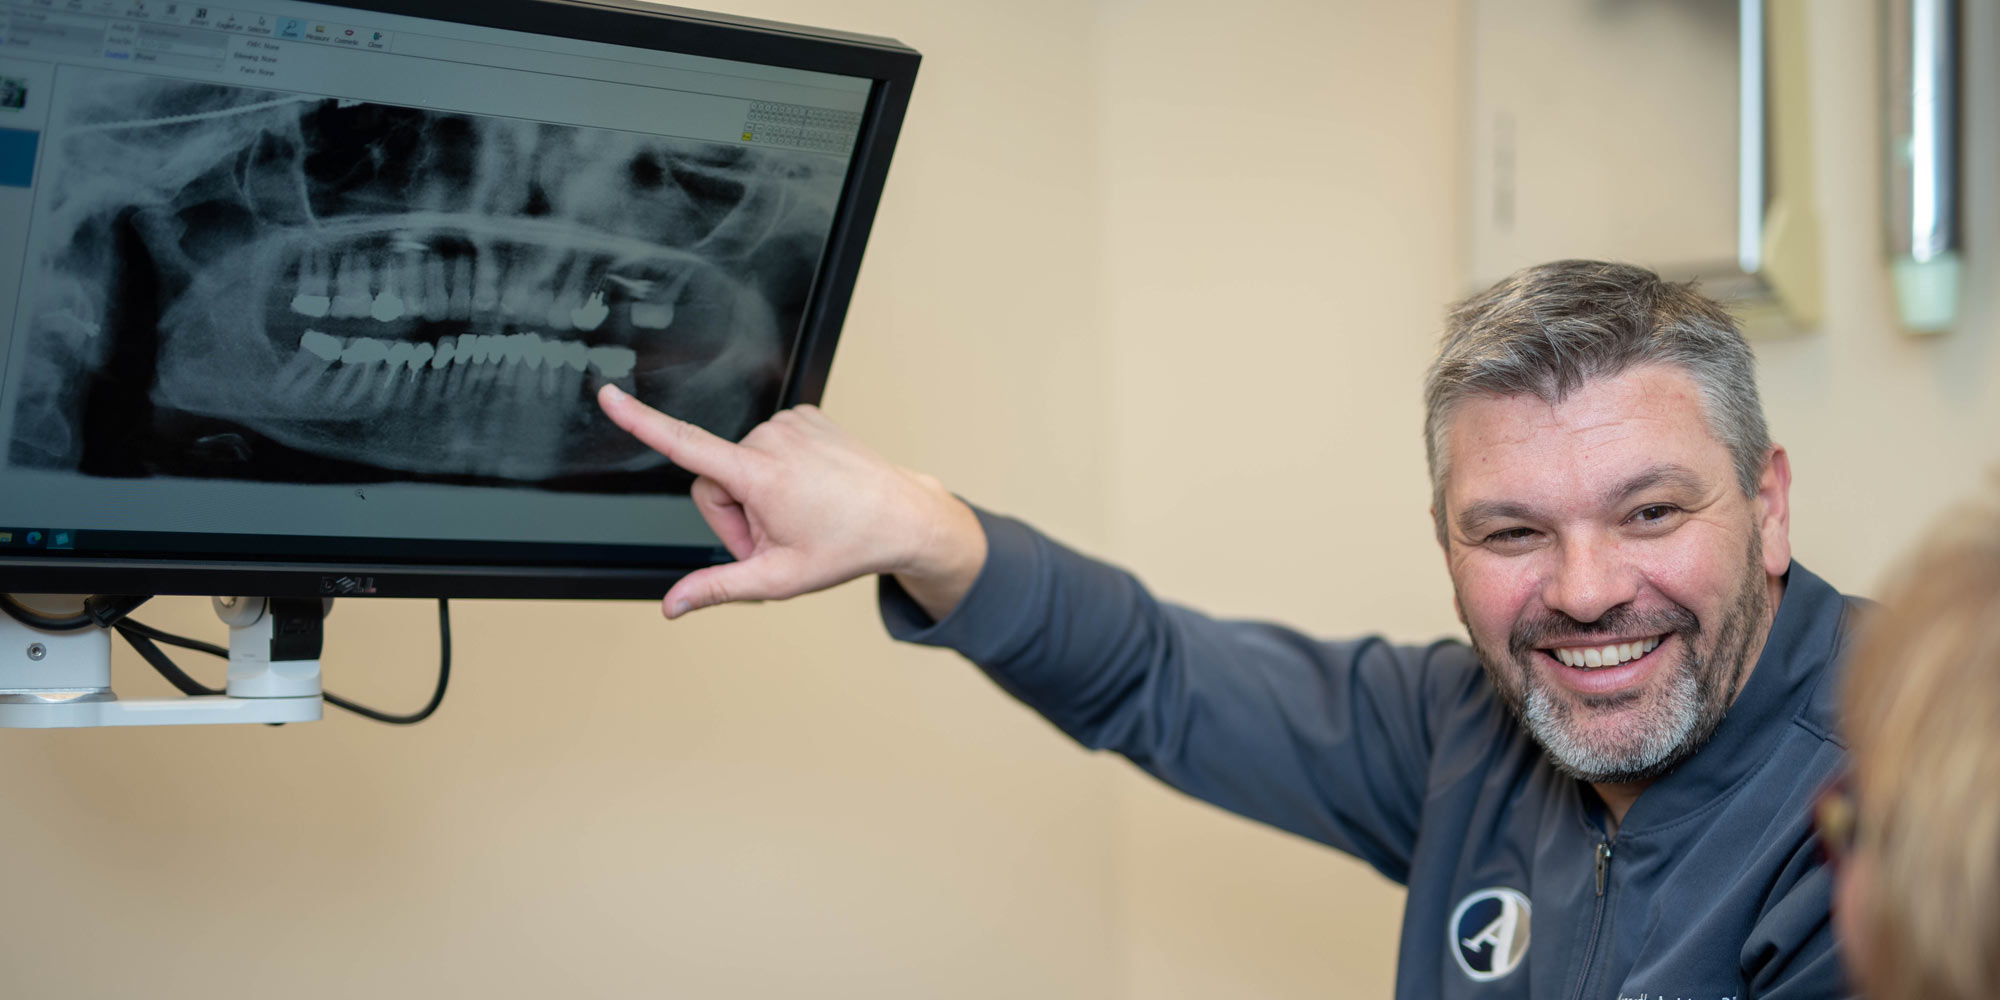 Dr. Ackley showing a patient's x-rays